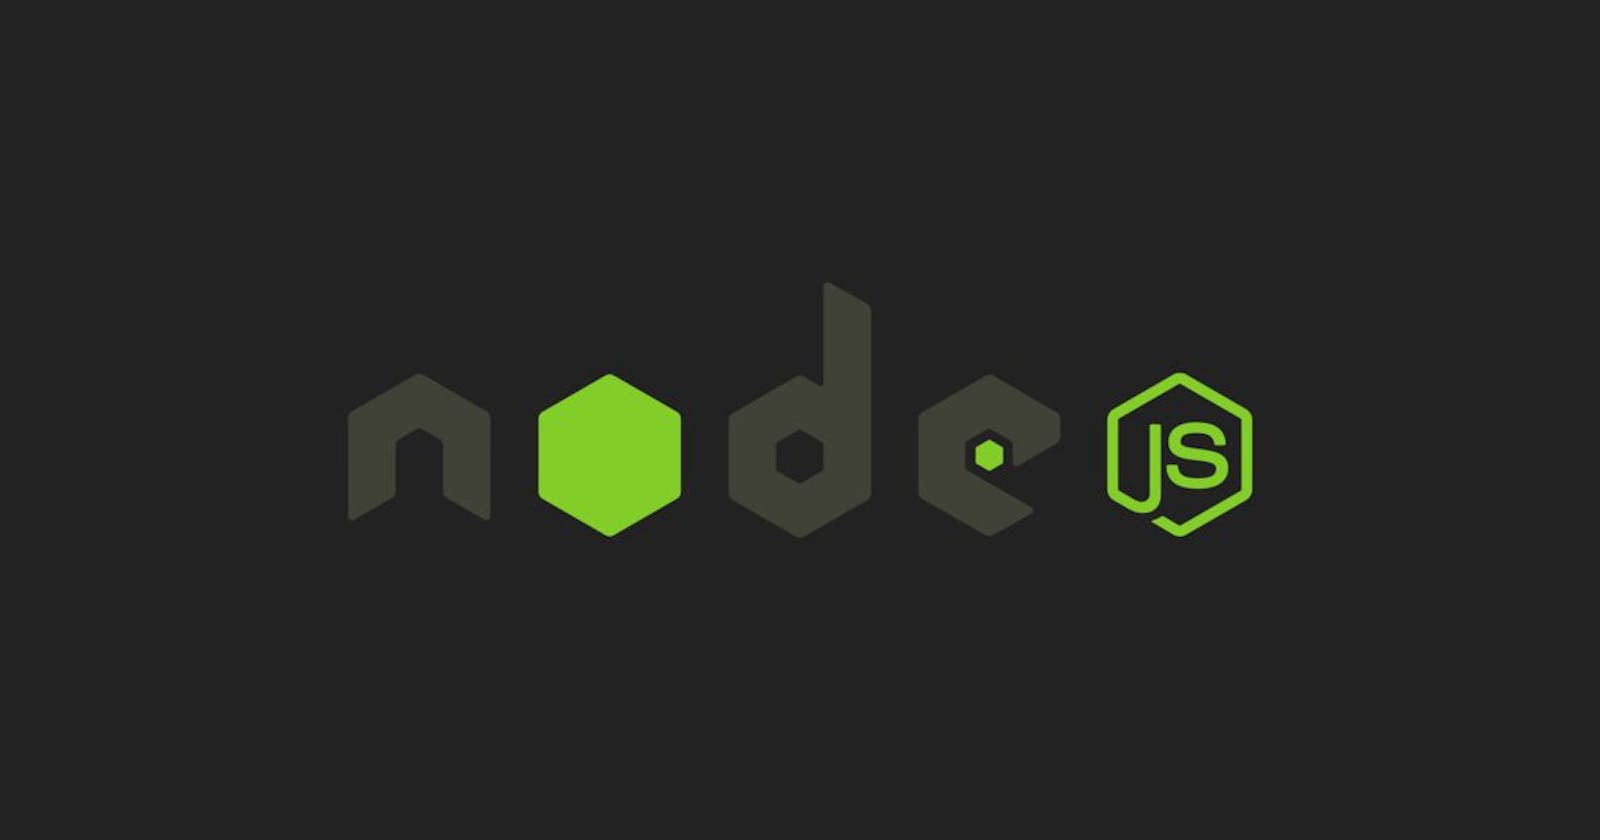 How to build and structure a Node.js MVC application